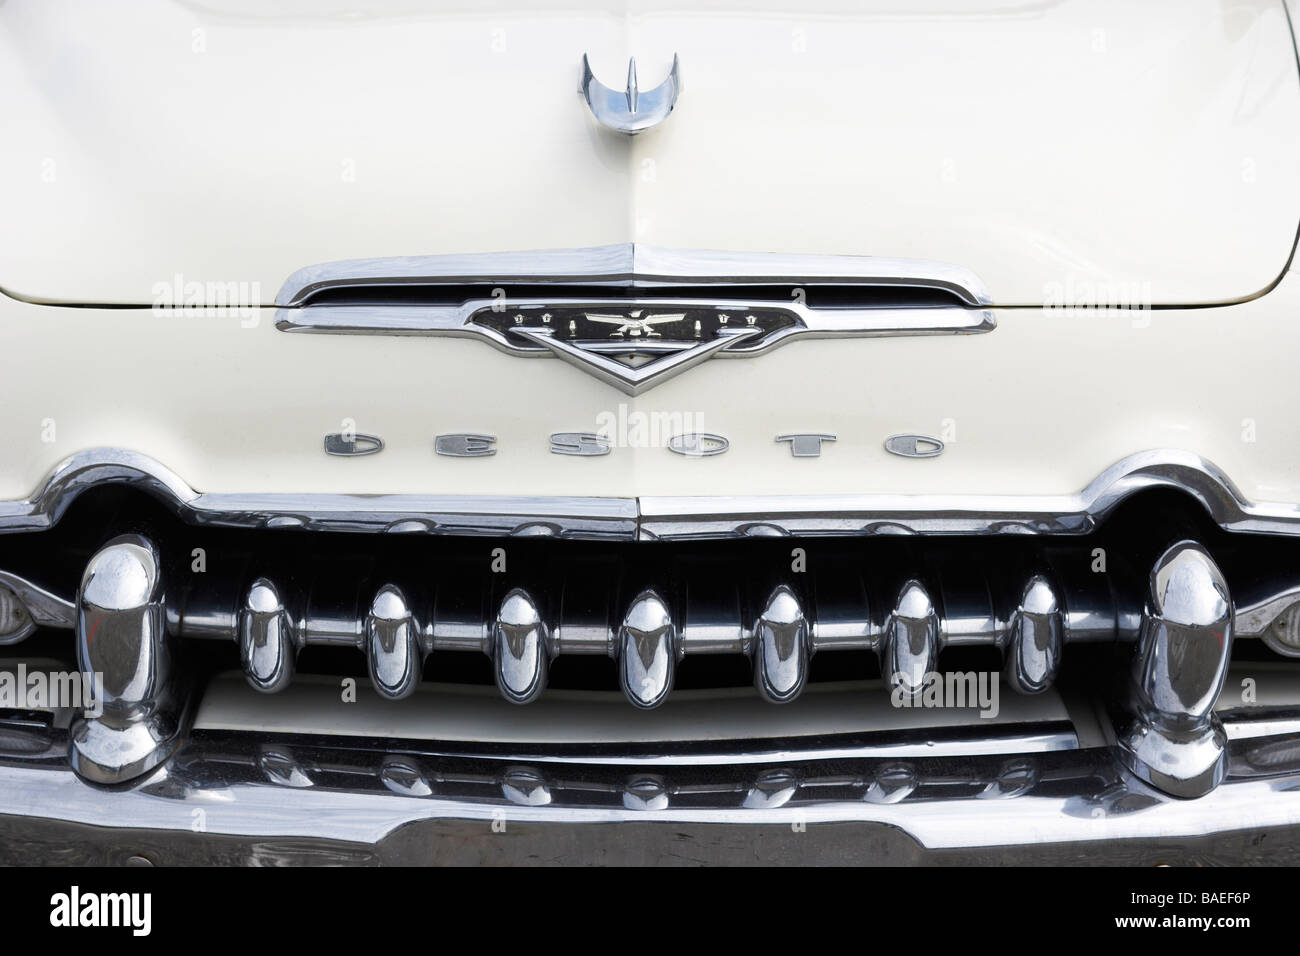 Desoto Grill High Resolution Stock Photography and Images - Alamy